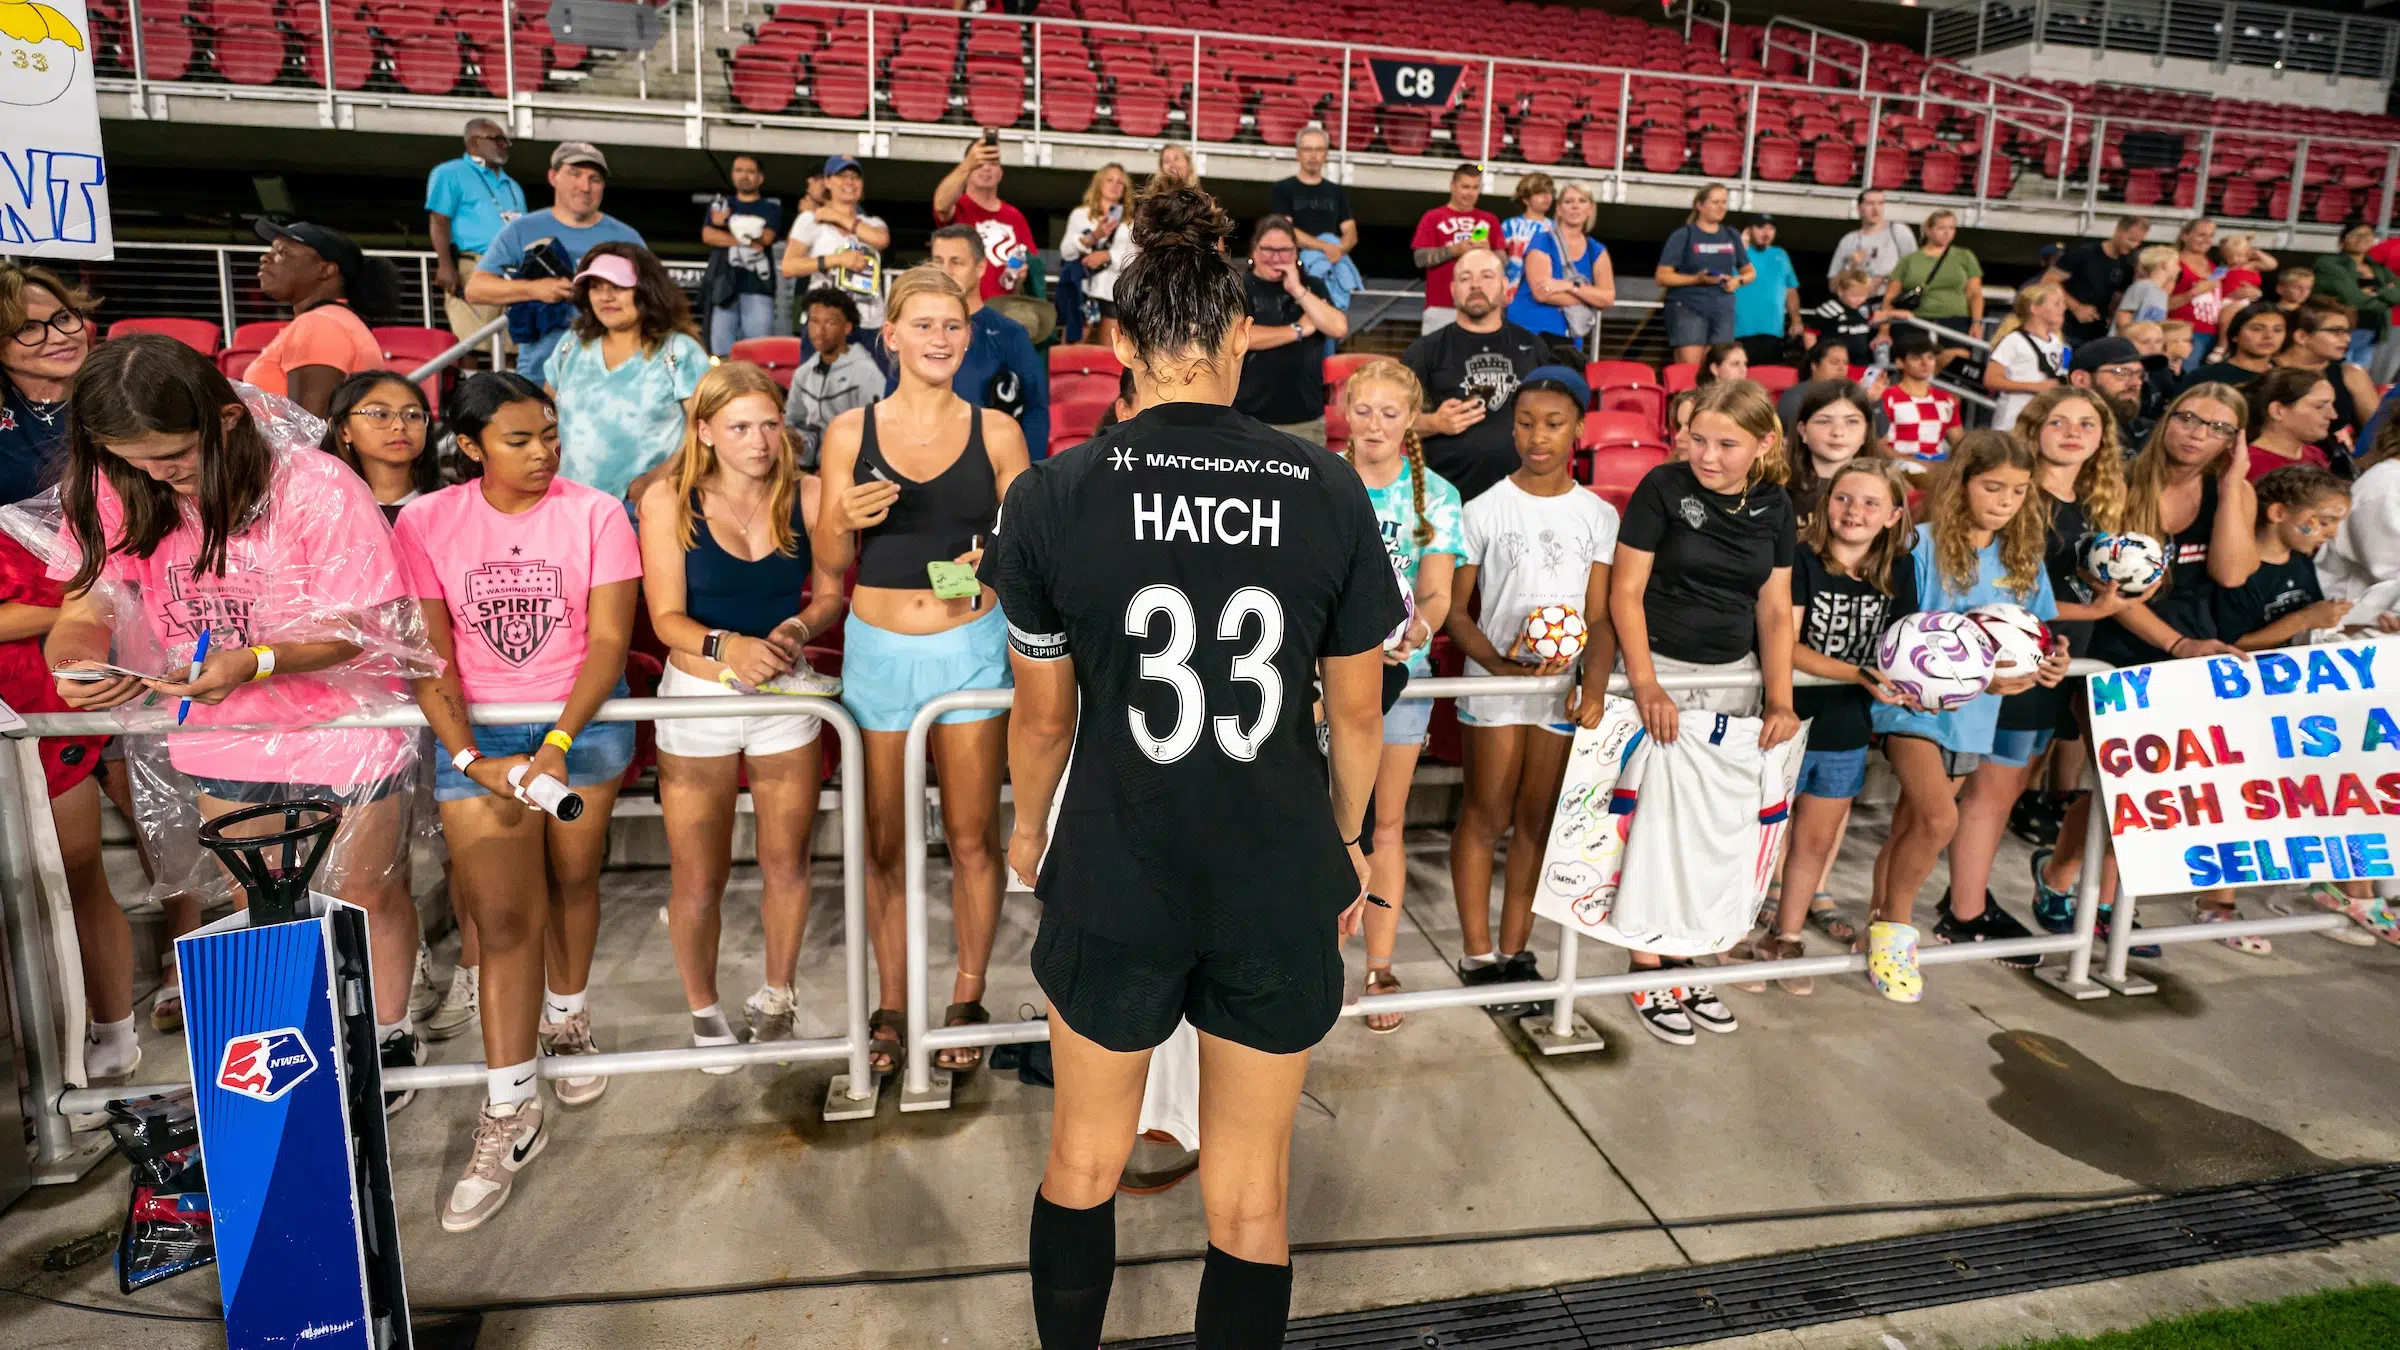 Ashley Hatch in a black uniform interacts with young fans after the game.